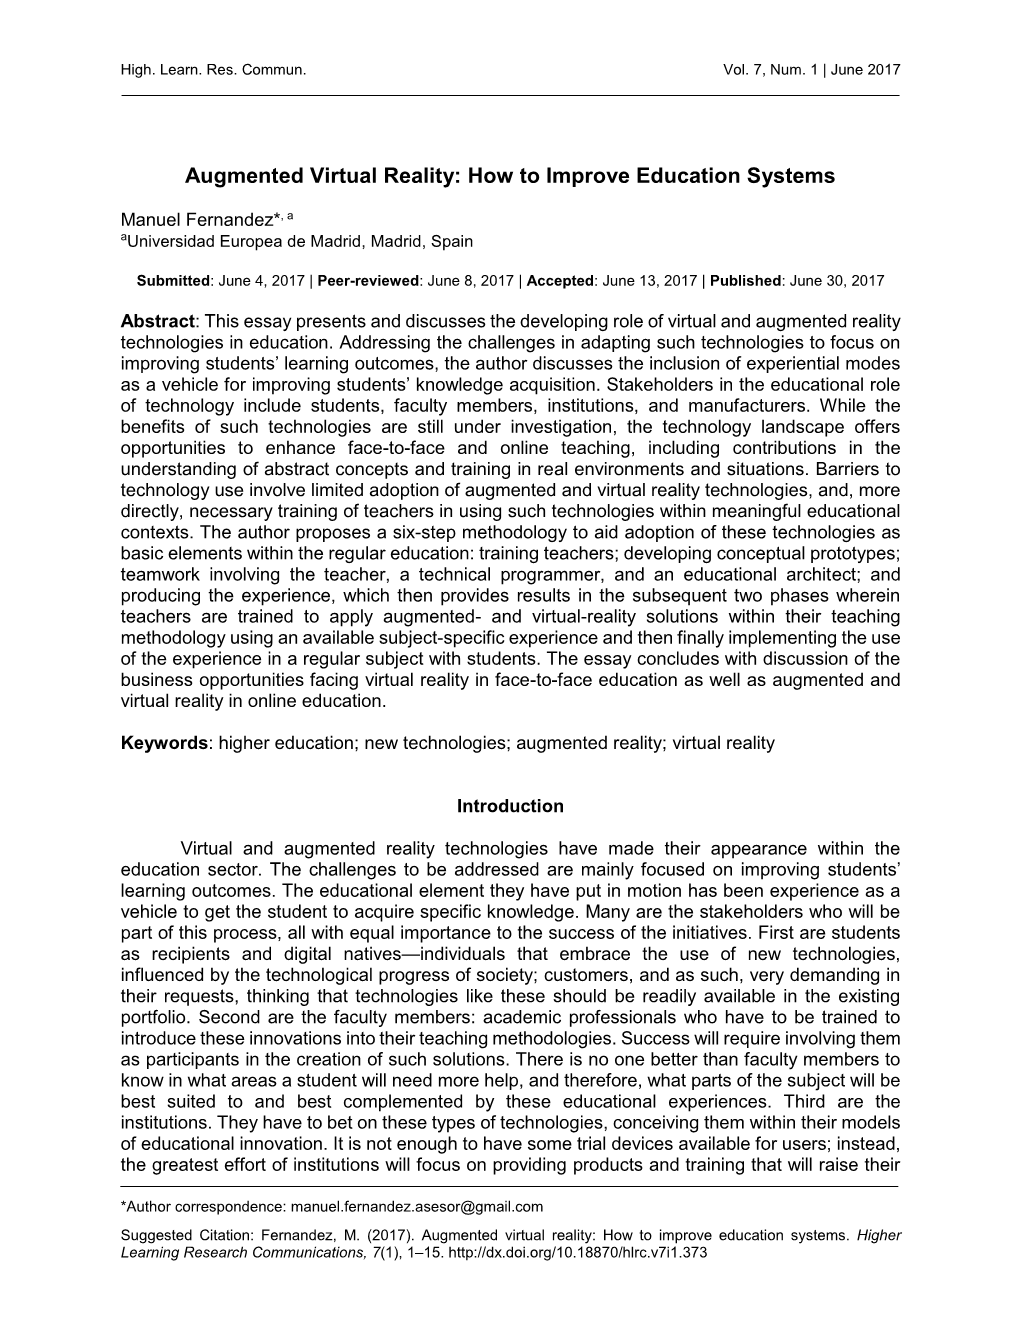 Augmented Virtual Reality: How to Improve Education Systems